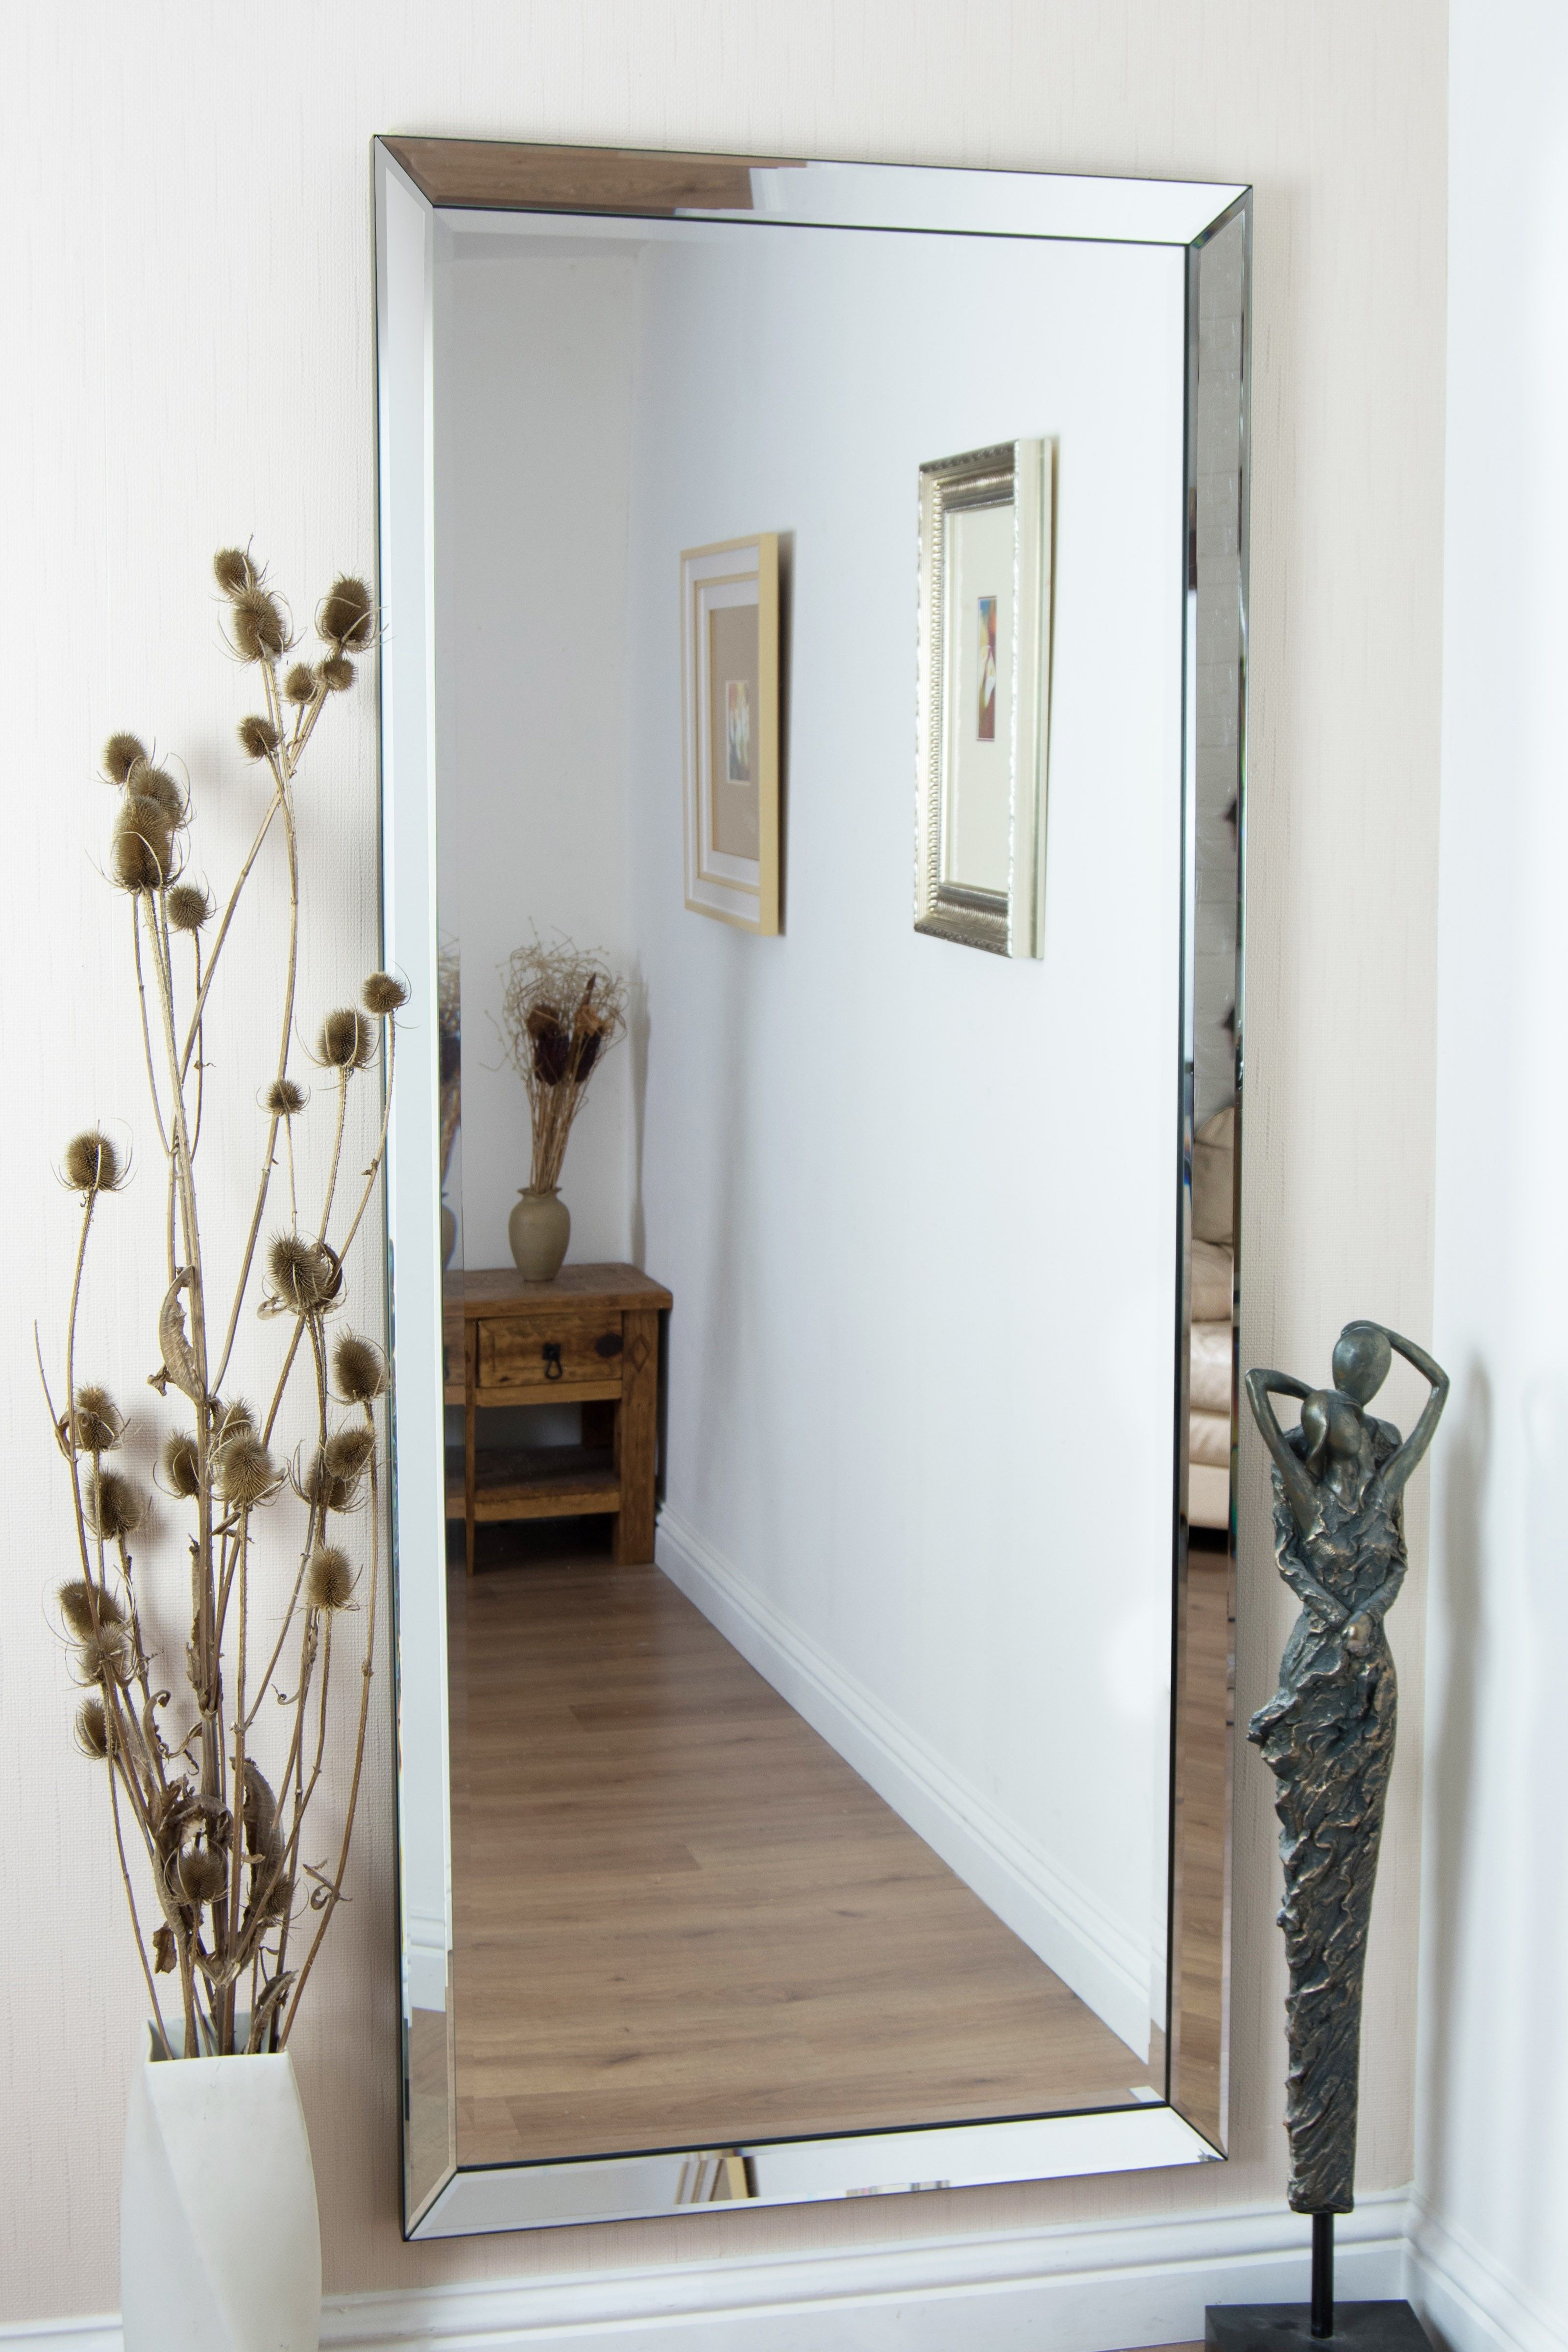 Fashionable Unique Full Length Wall Mirrors Photos Mirror Decorative Decoration With Framed Full Length Wall Mirrors (View 7 of 20)